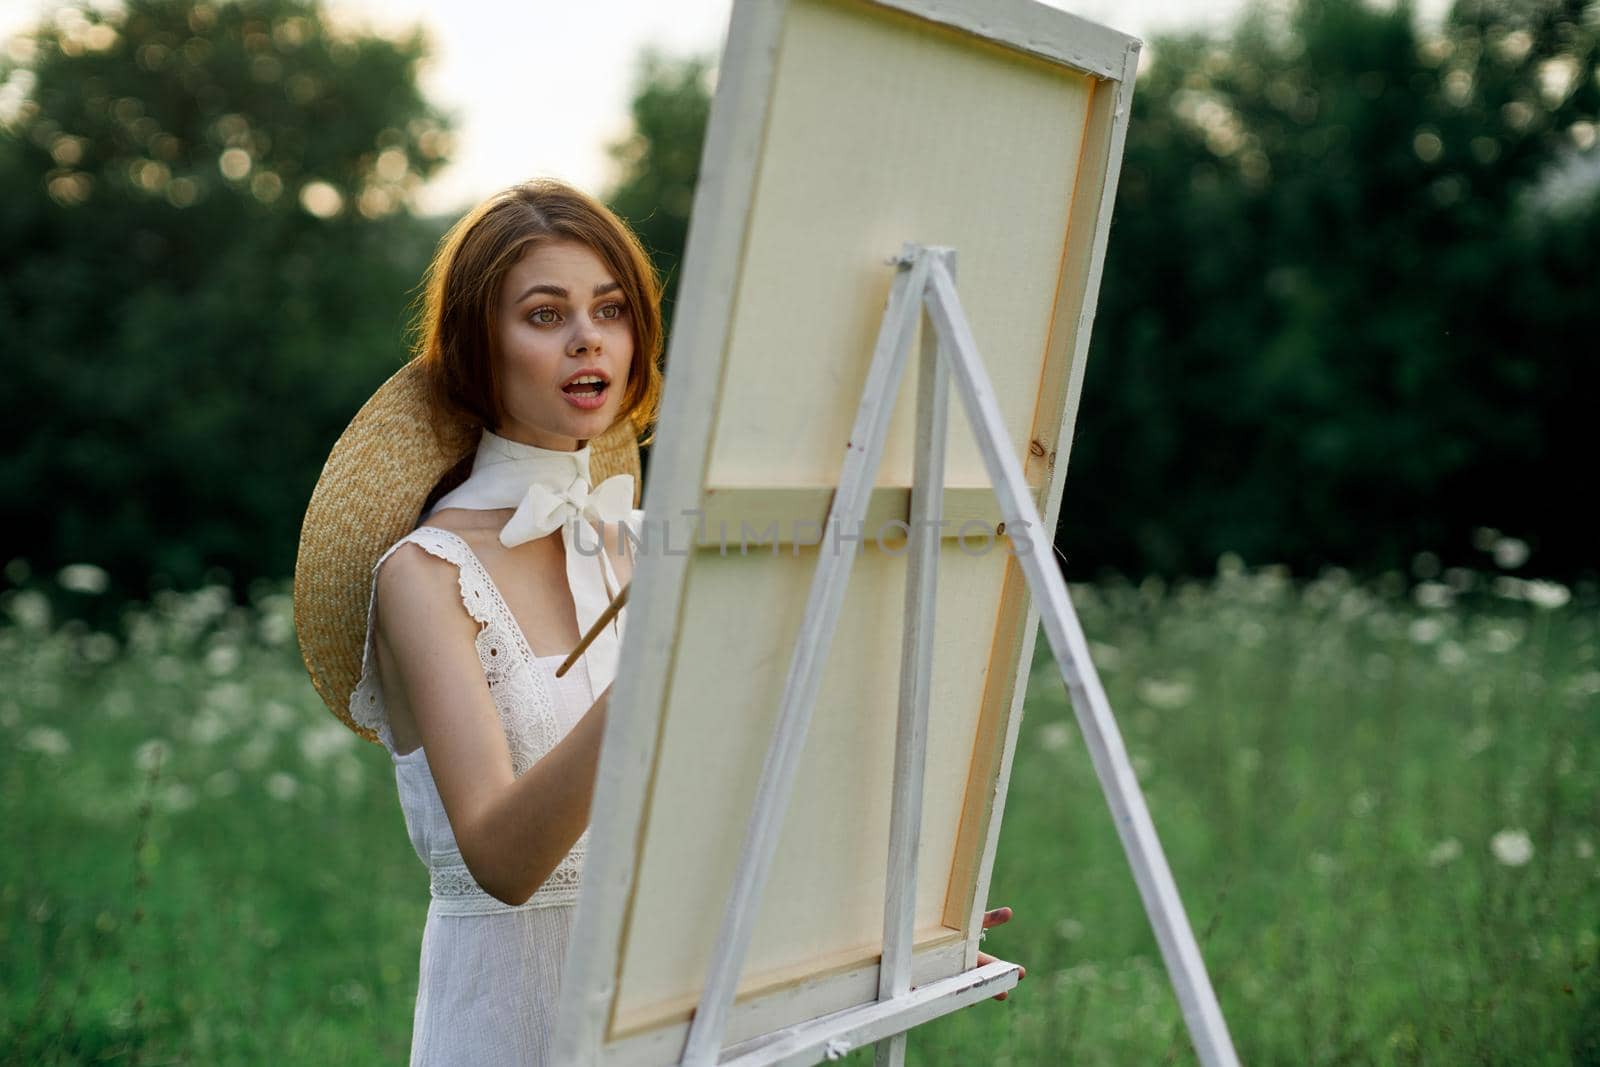 Woman in white dress paints a picture outdoors hobby creative. High quality photo